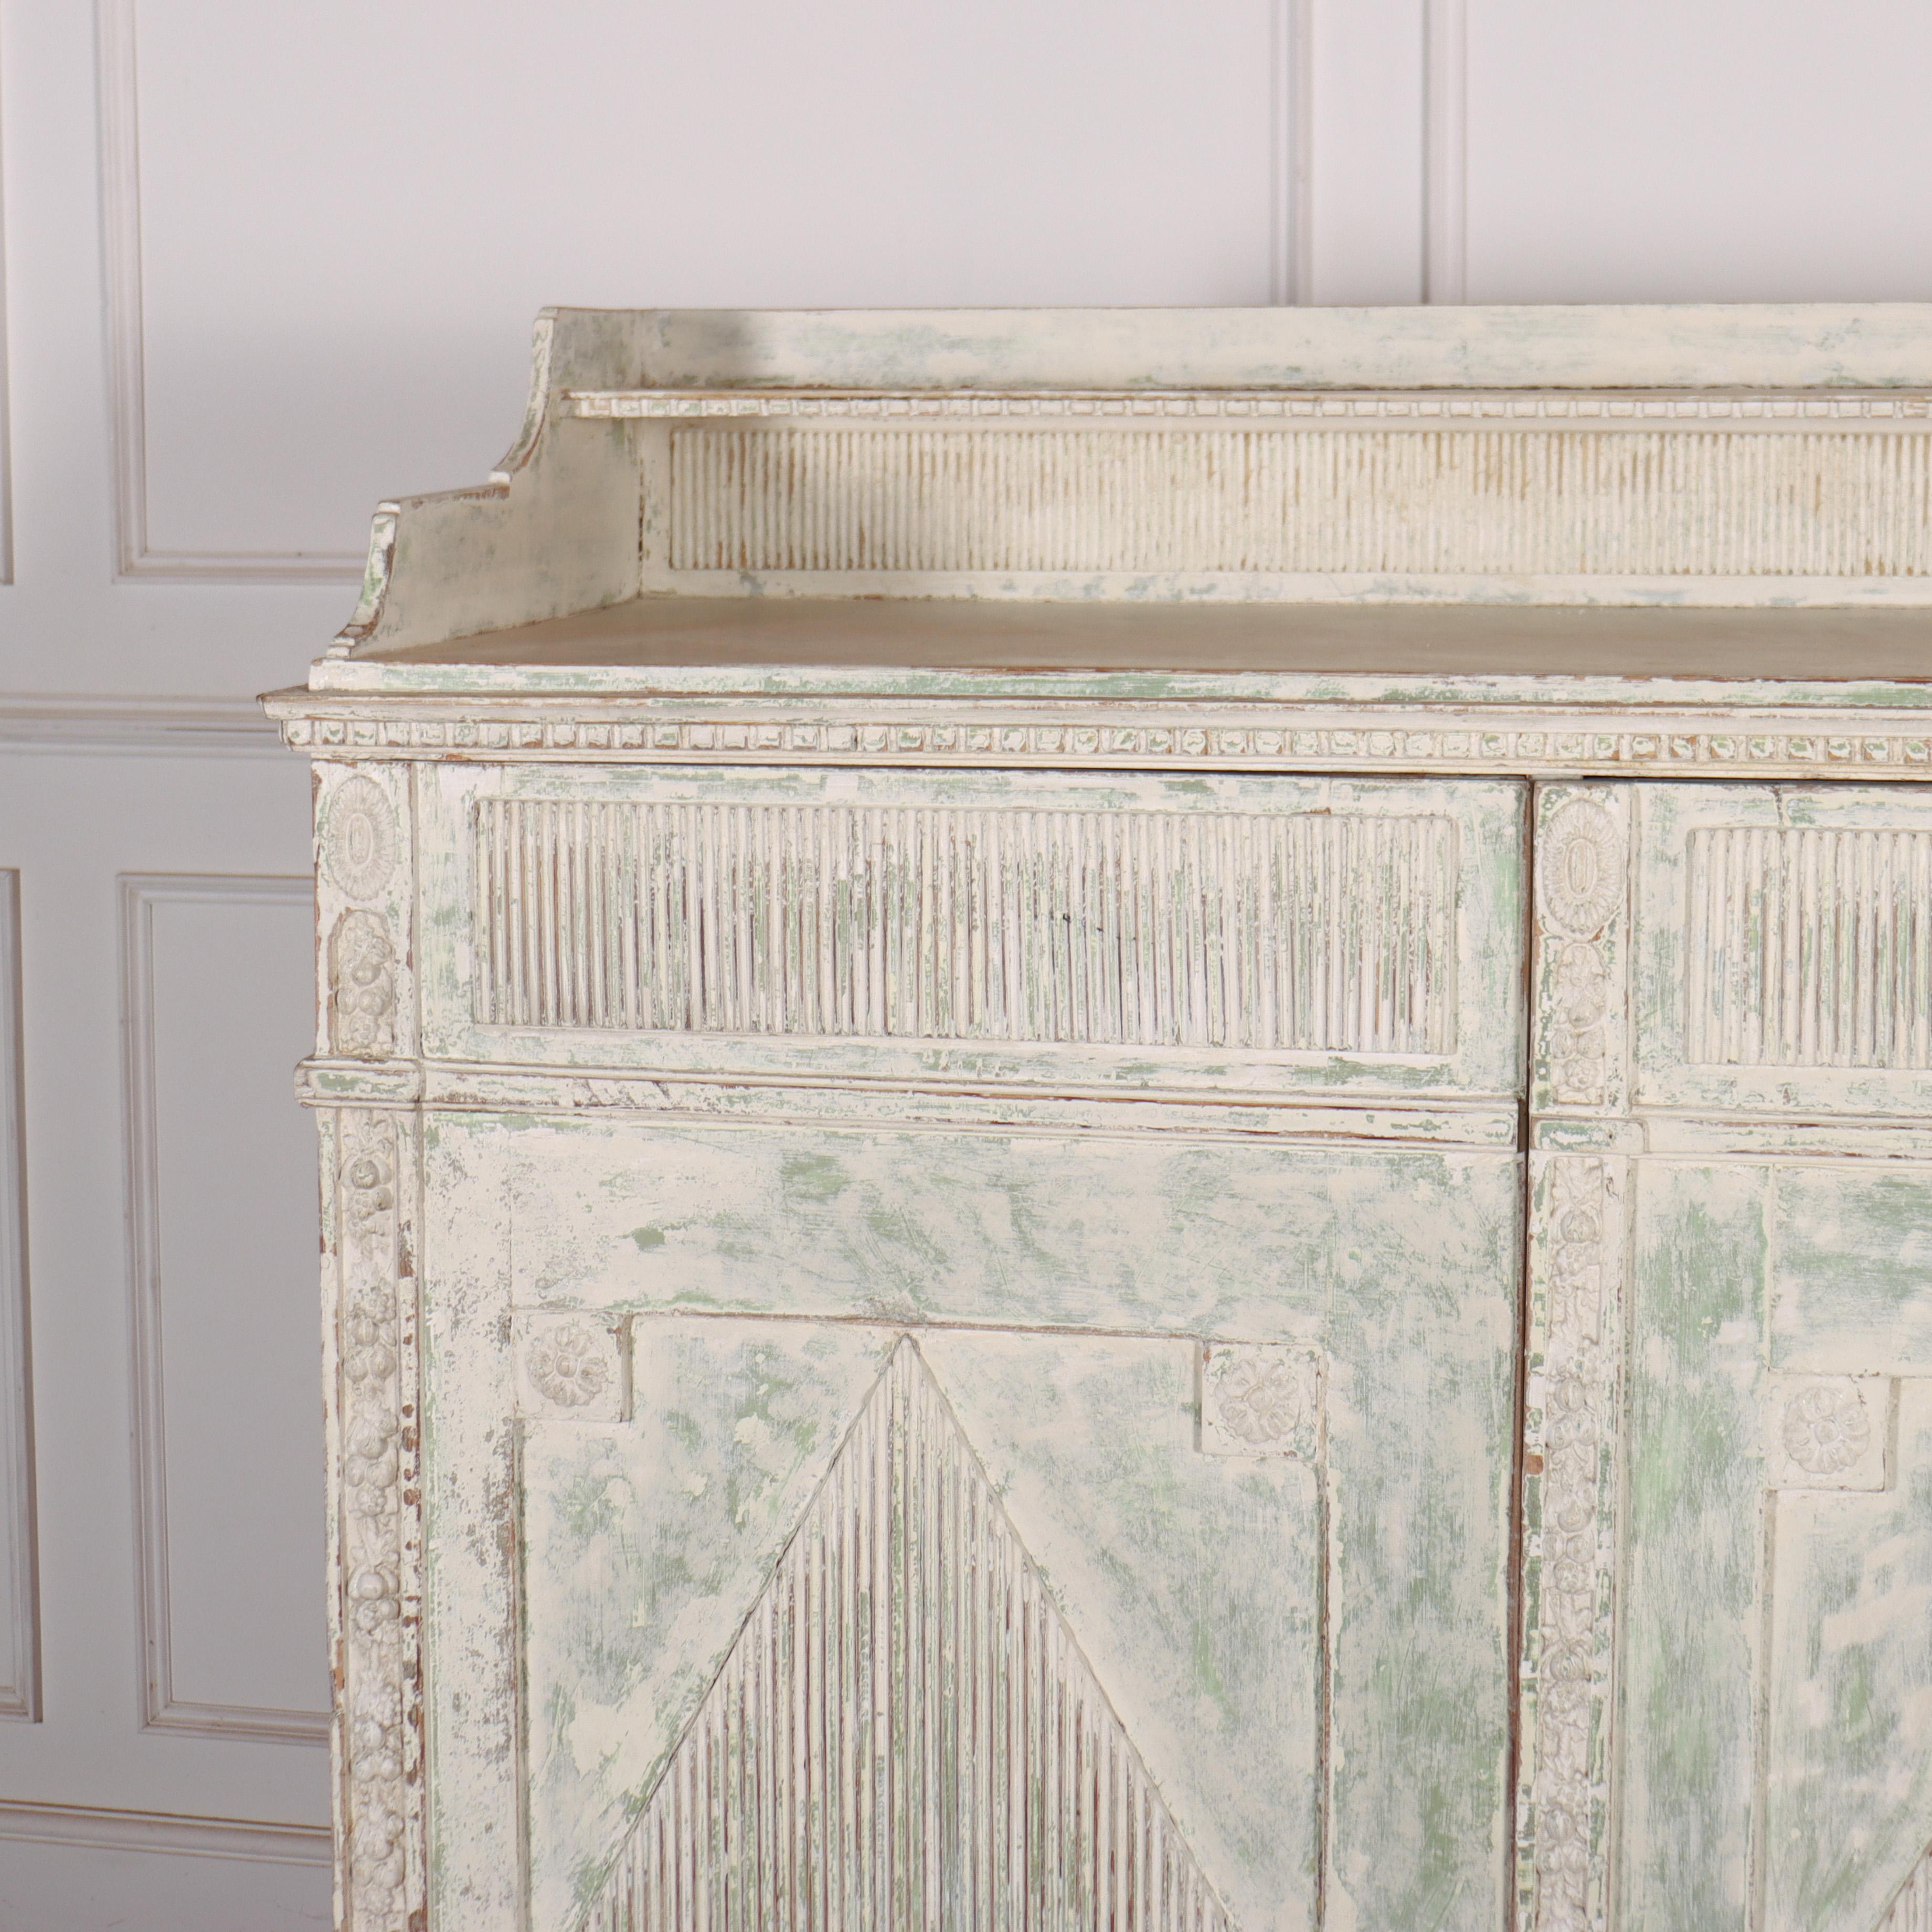 18th C Swedish original painted pine linen cupboard. 1790.

Height to worktop is 53 inches.

Reference: 8041

Dimensions
51 inches (130 cms) Wide
22.5 inches (57 cms) Deep
60.5 inches (154 cms) High